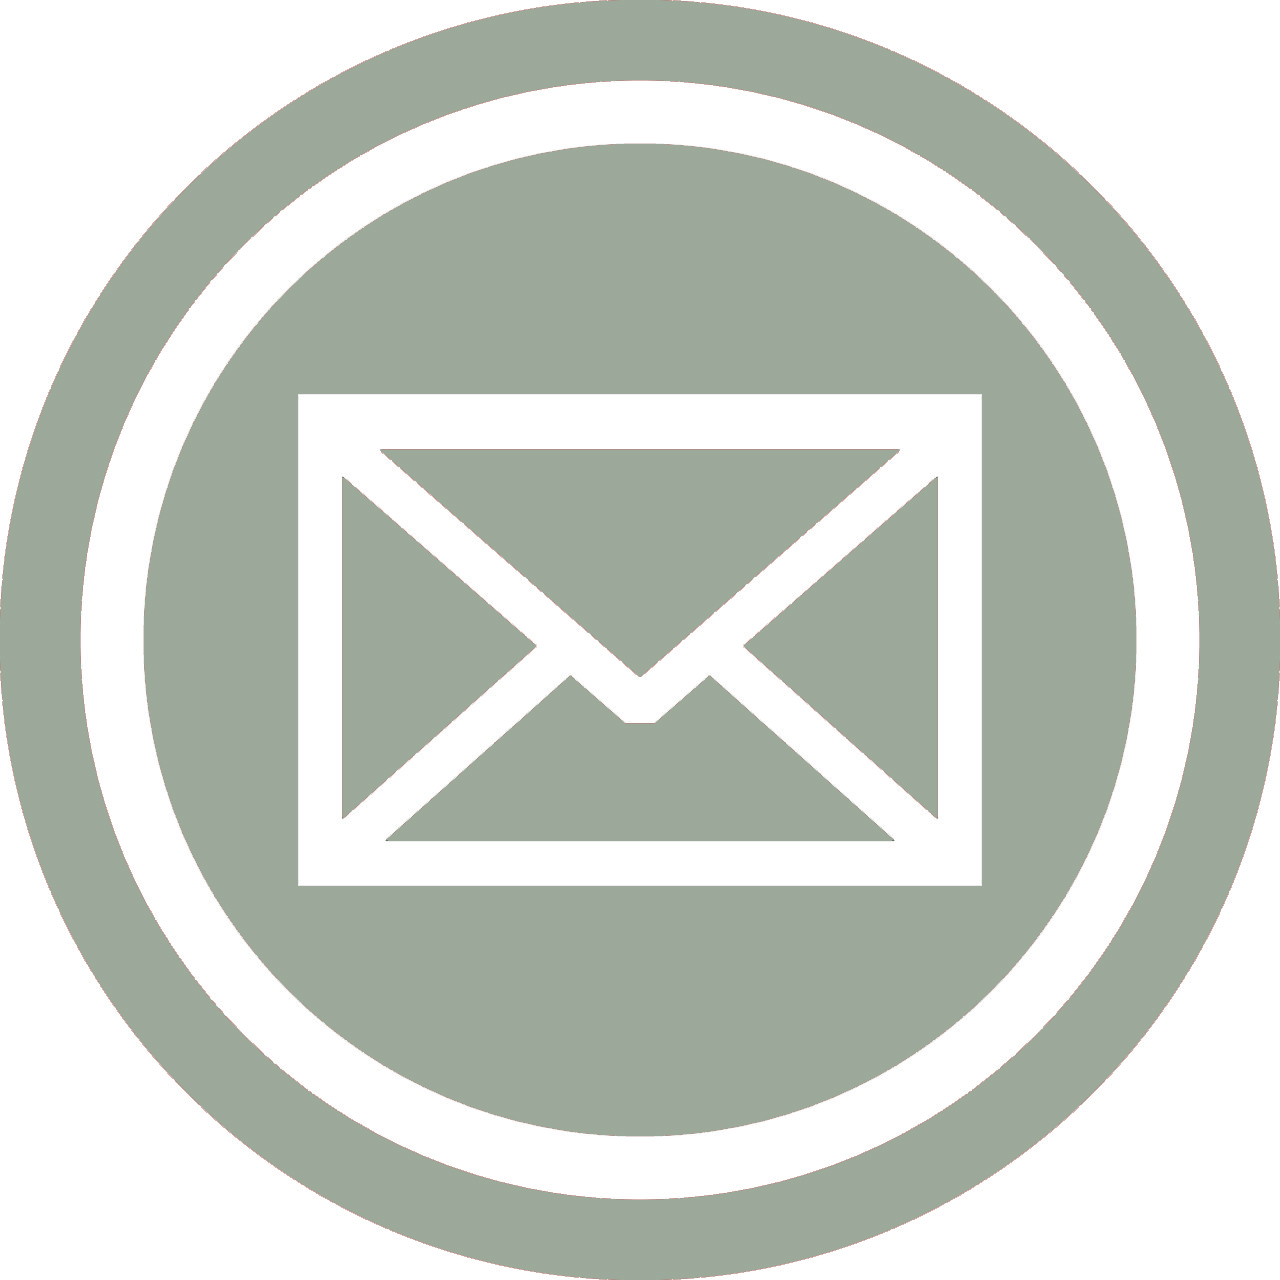 Mail logo with envelope